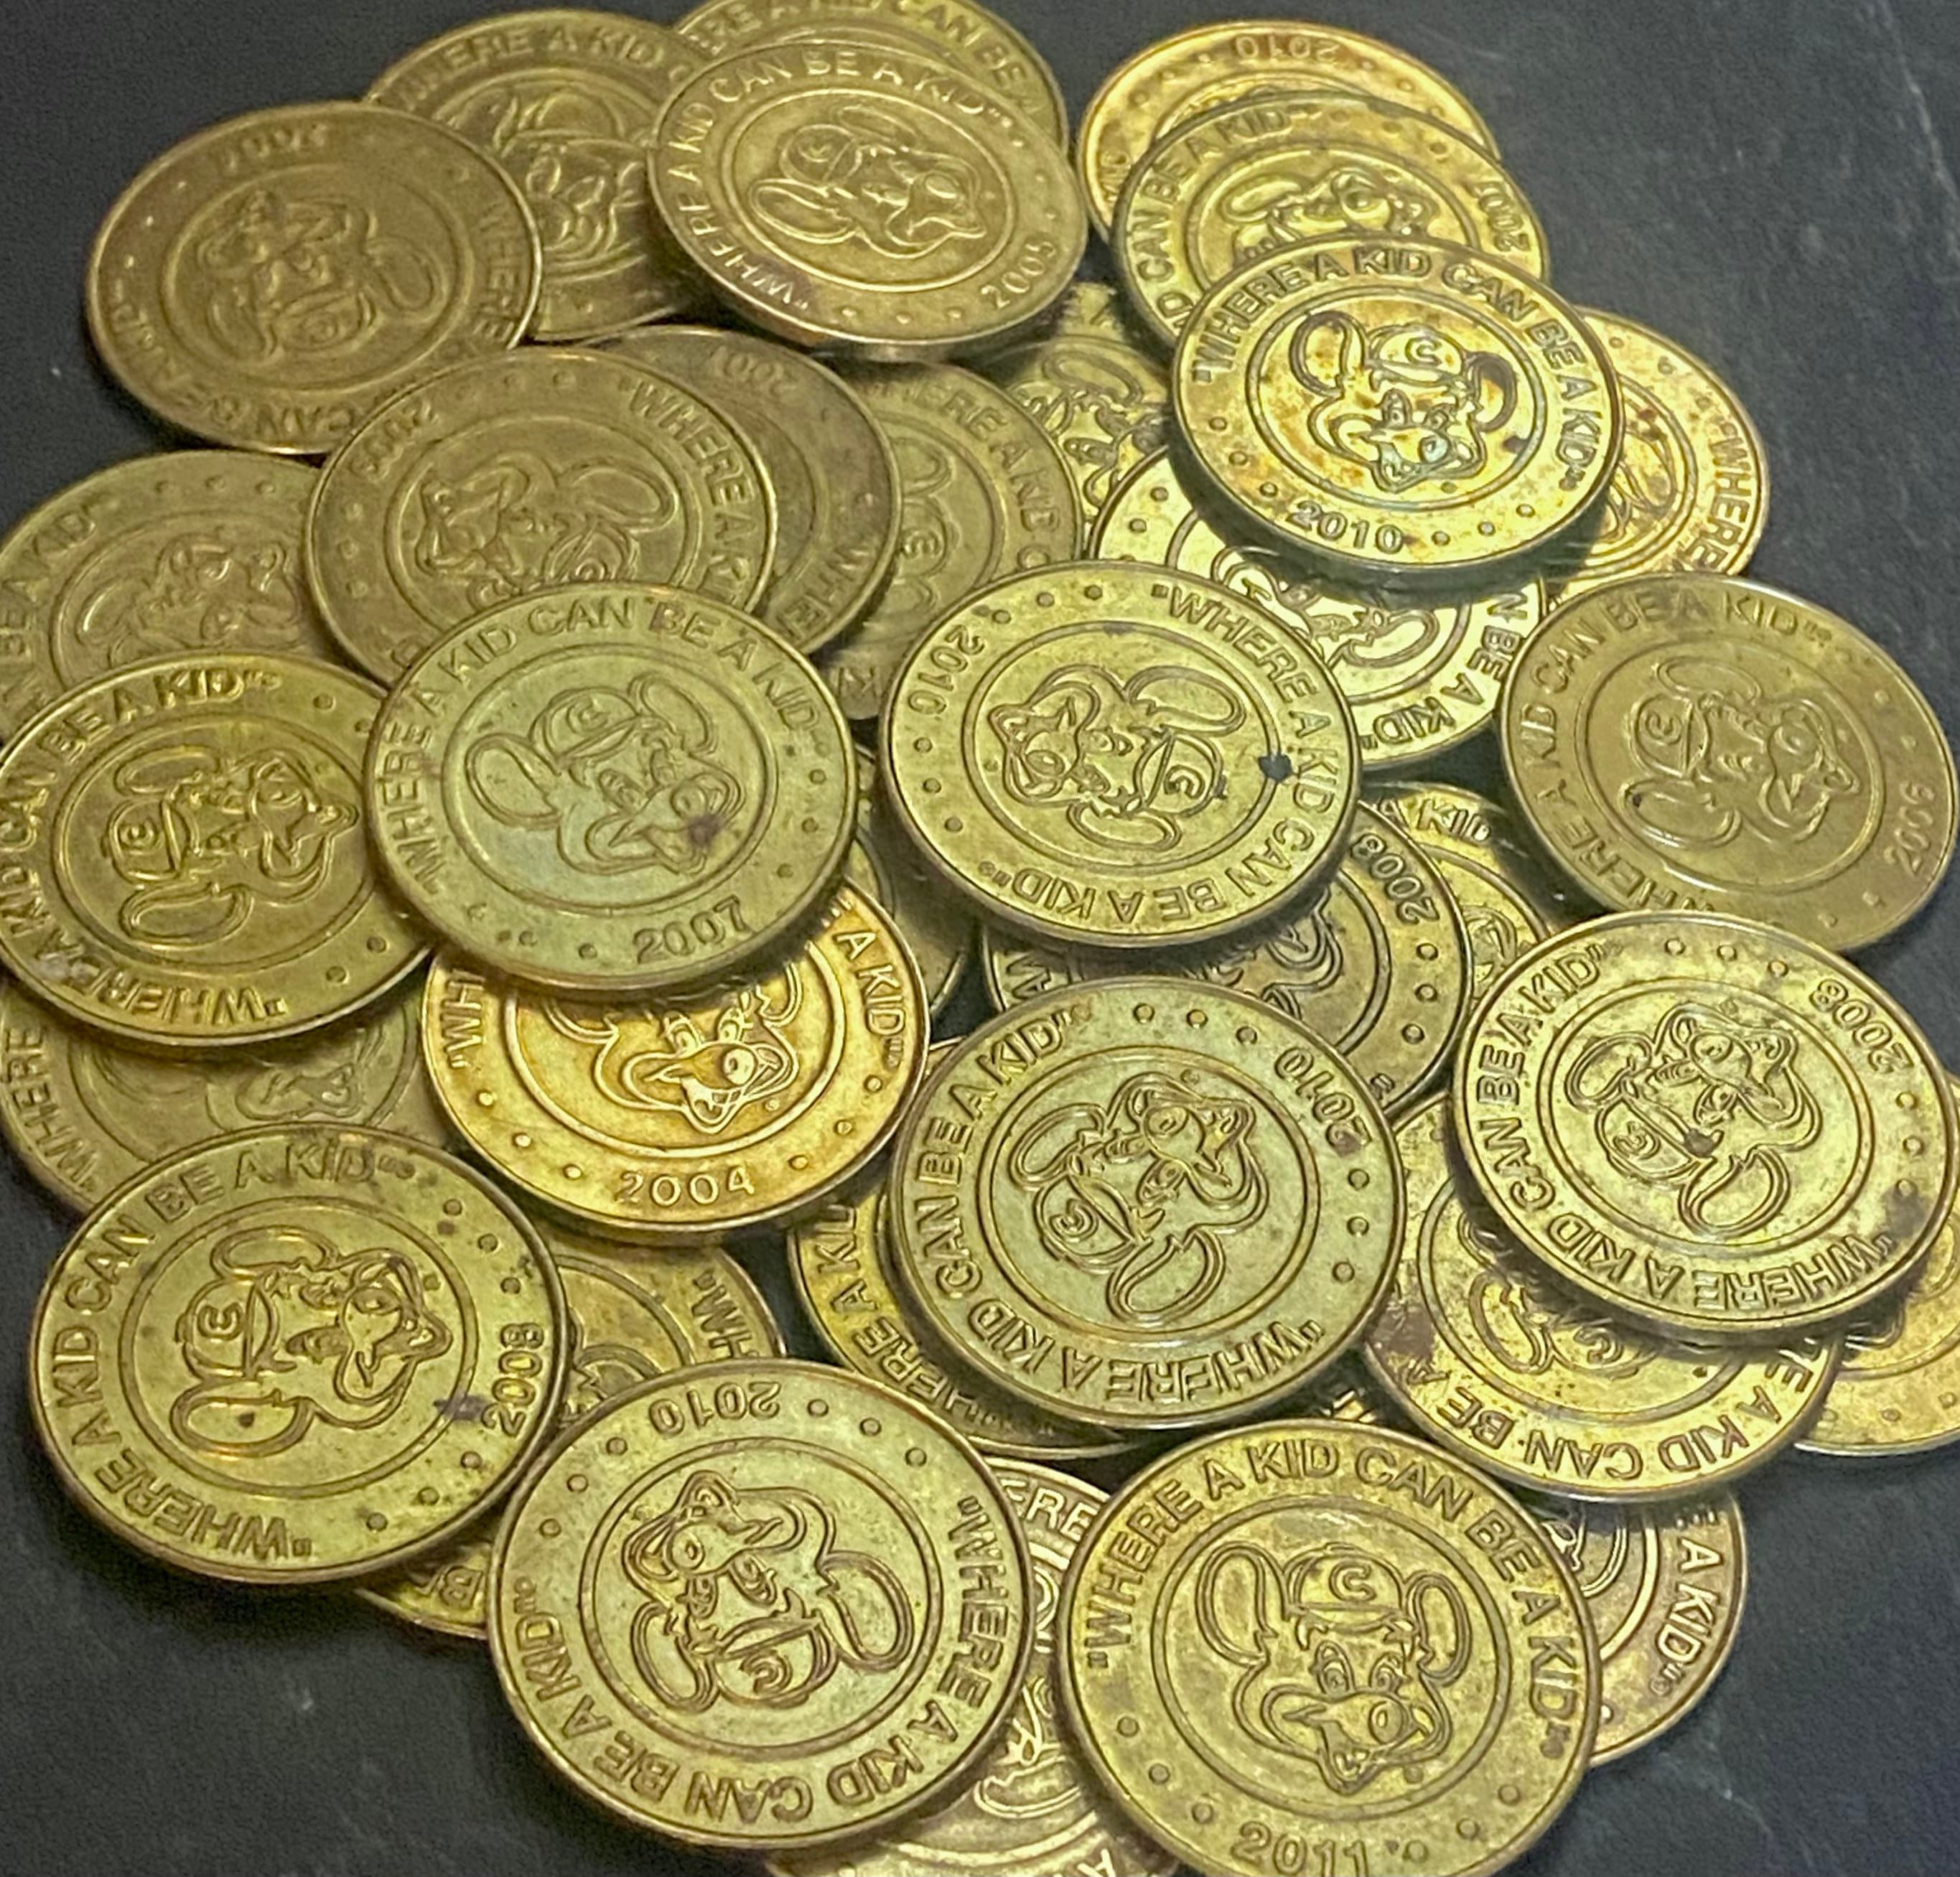 Old Chuck E cheese tokens | Museum of the Game Forums